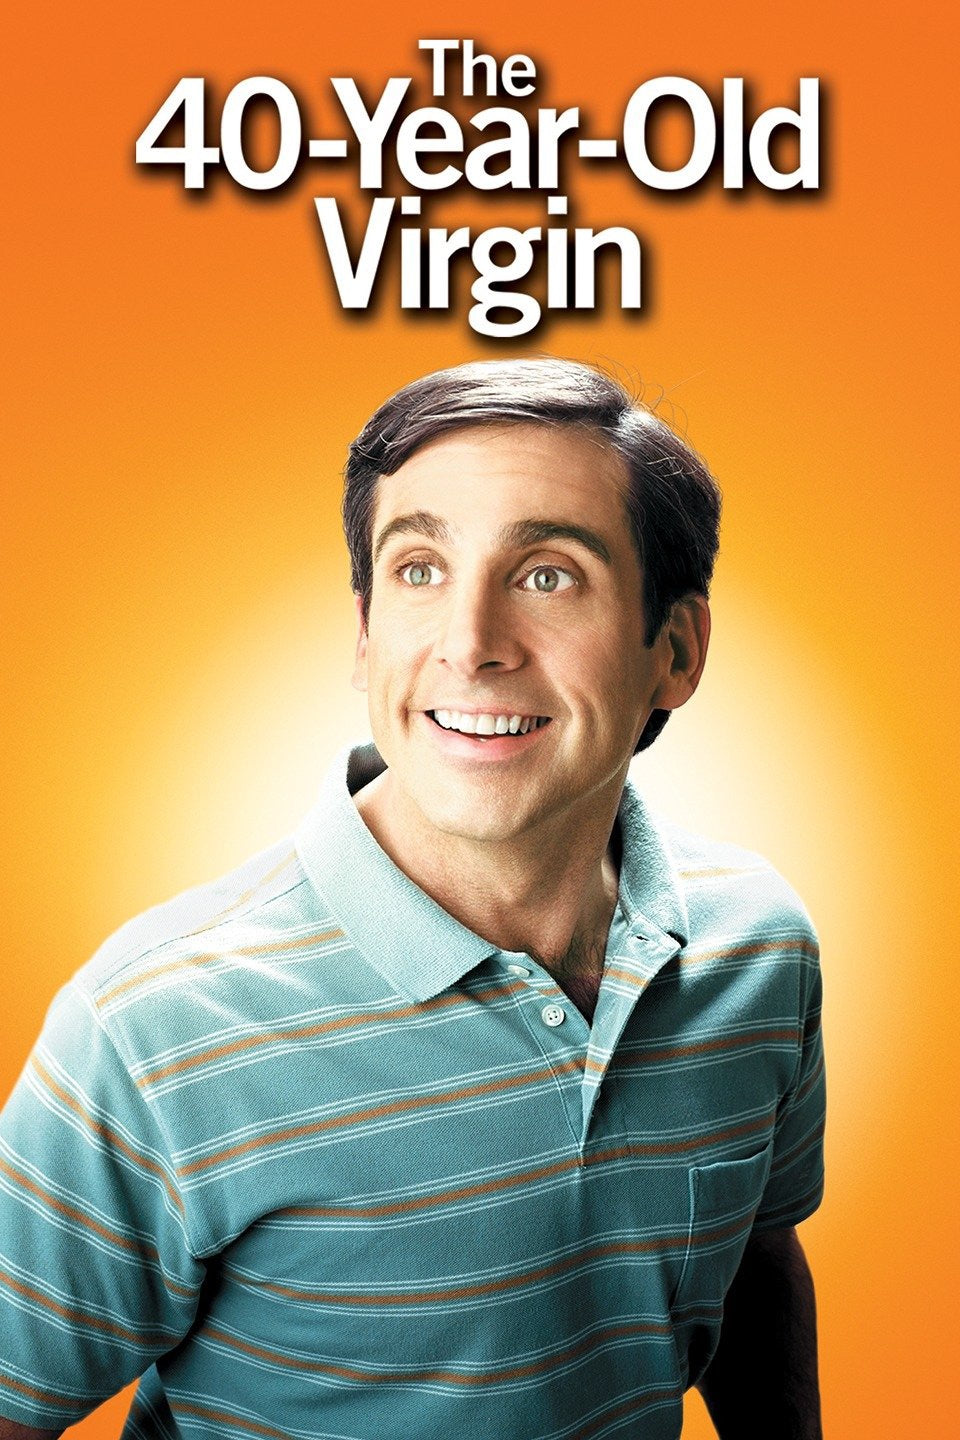 The 40-Year-Old Virgin [Unrated] (2005: Ports Via MA) iTunes HD code